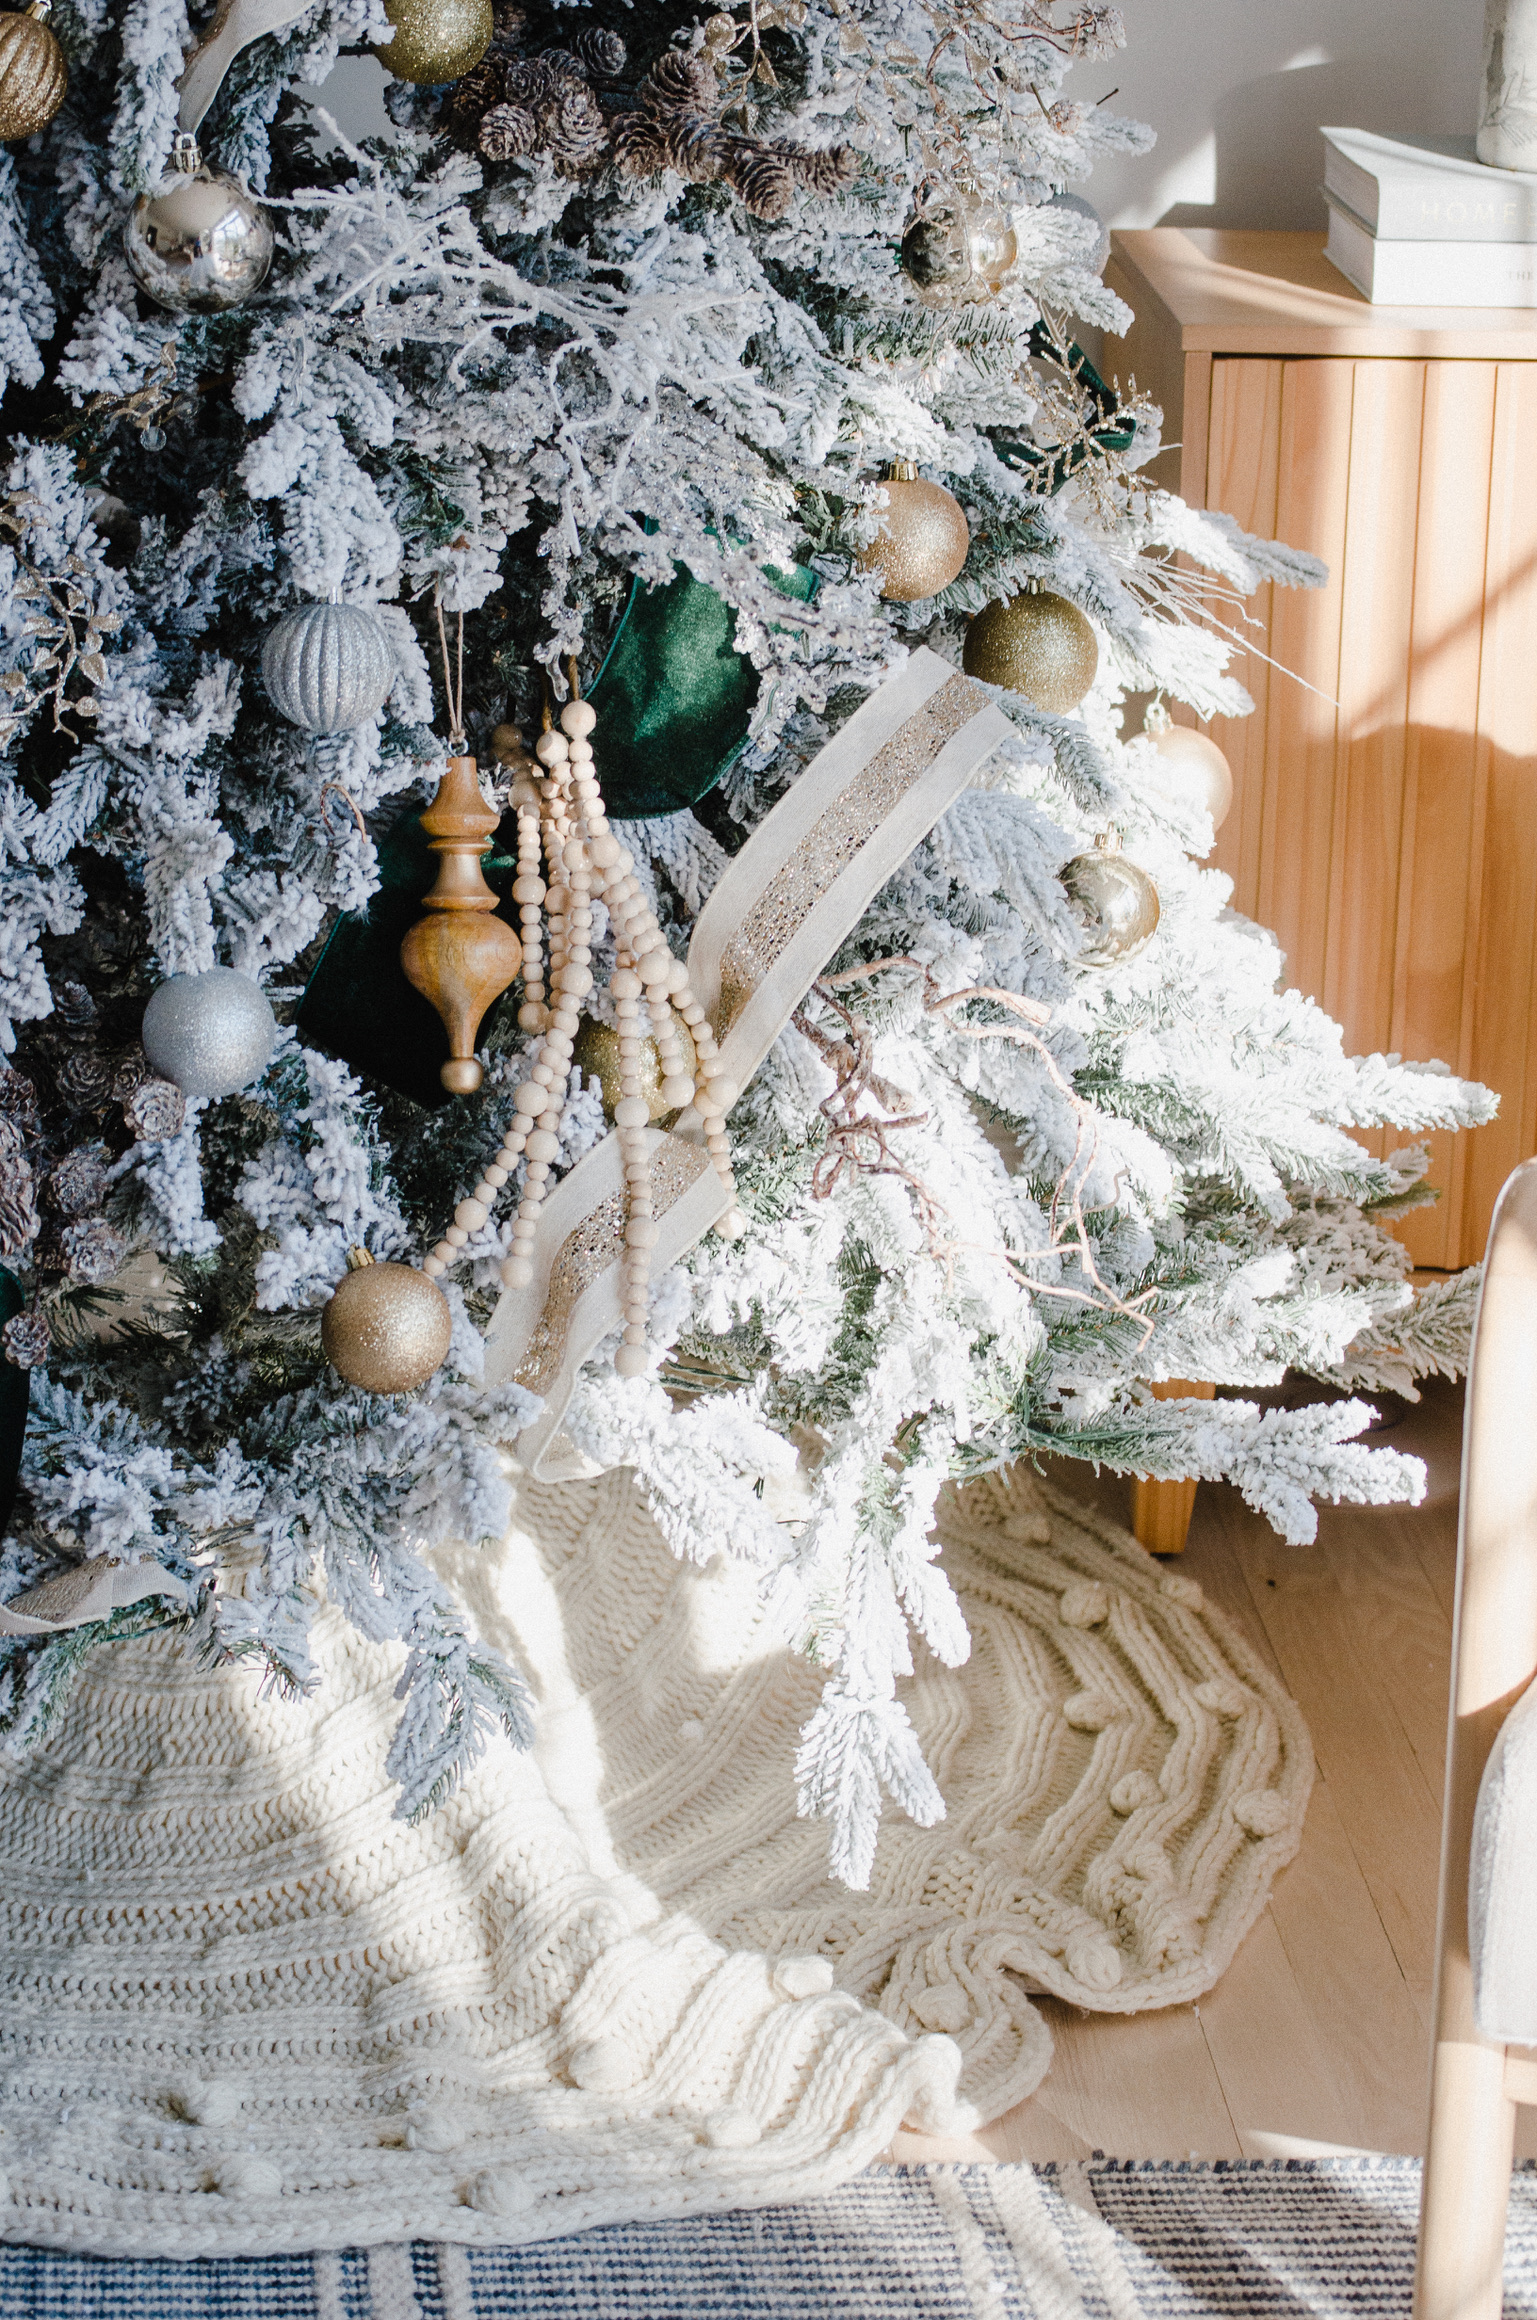 Connecticut Lifestyle blogger Lauren McBride shares a photo of her Christmas tree.